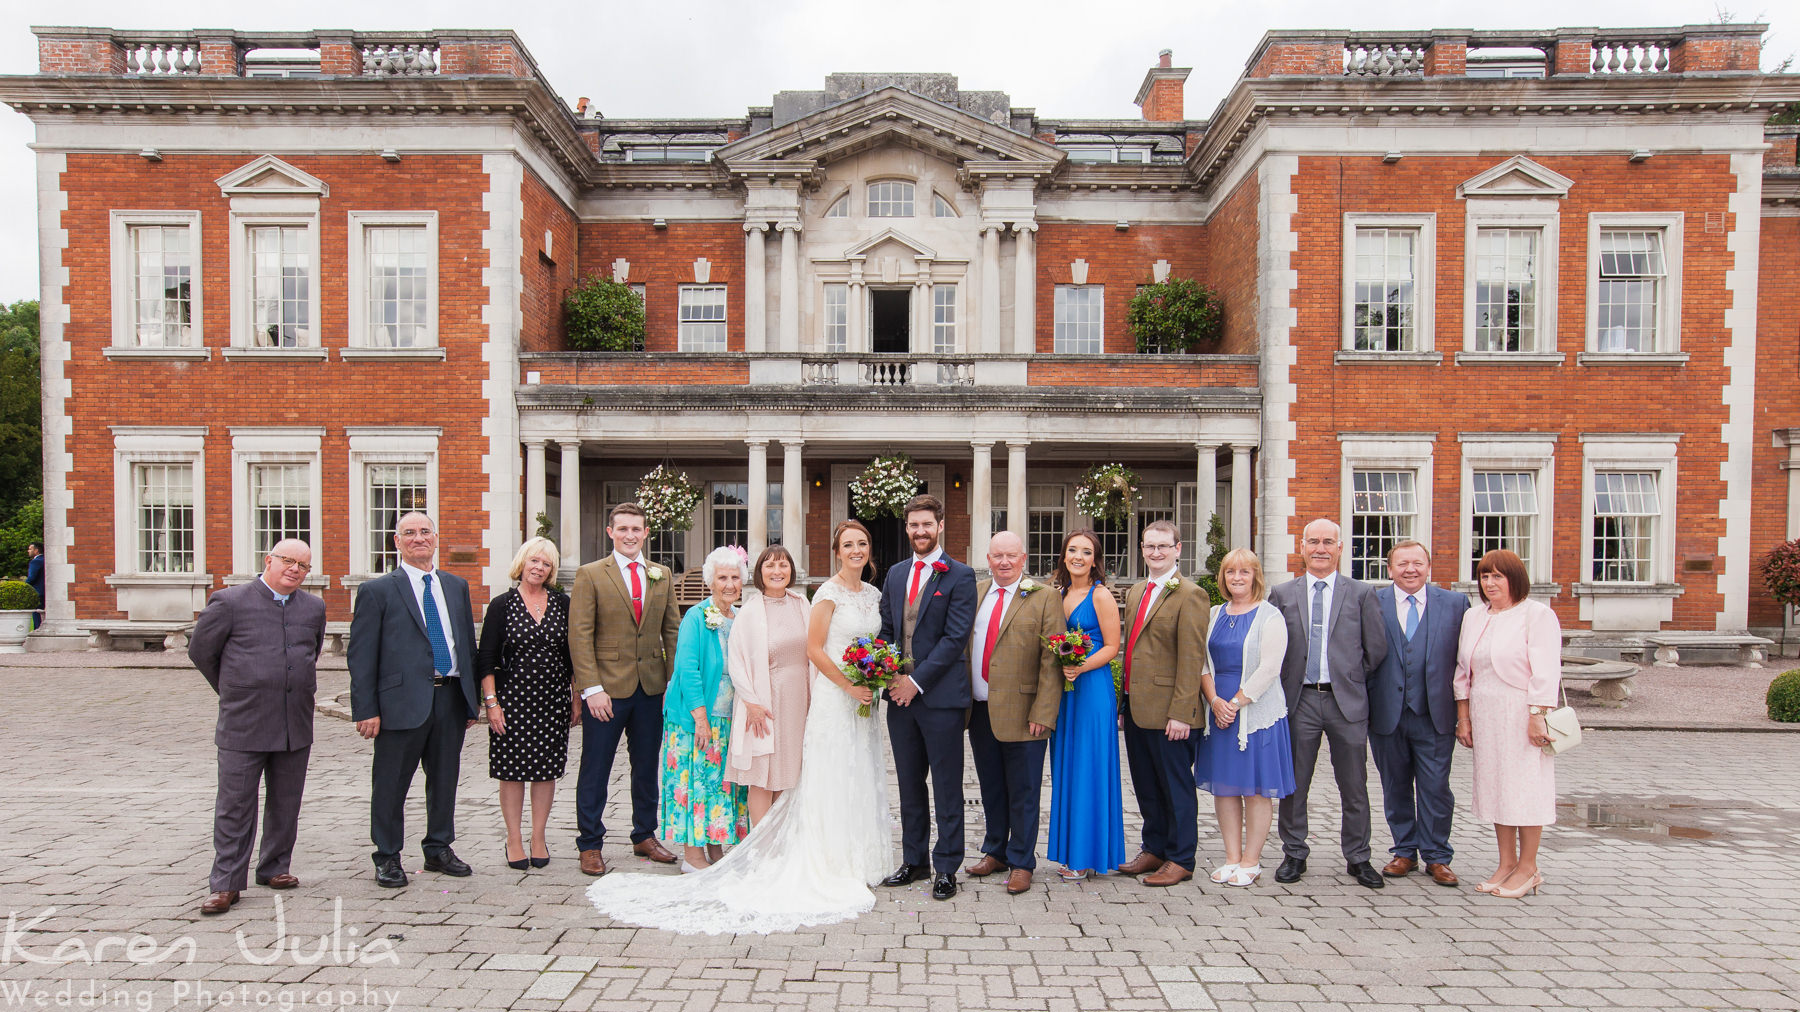 traditional style family wedding photo at Eaves Hall